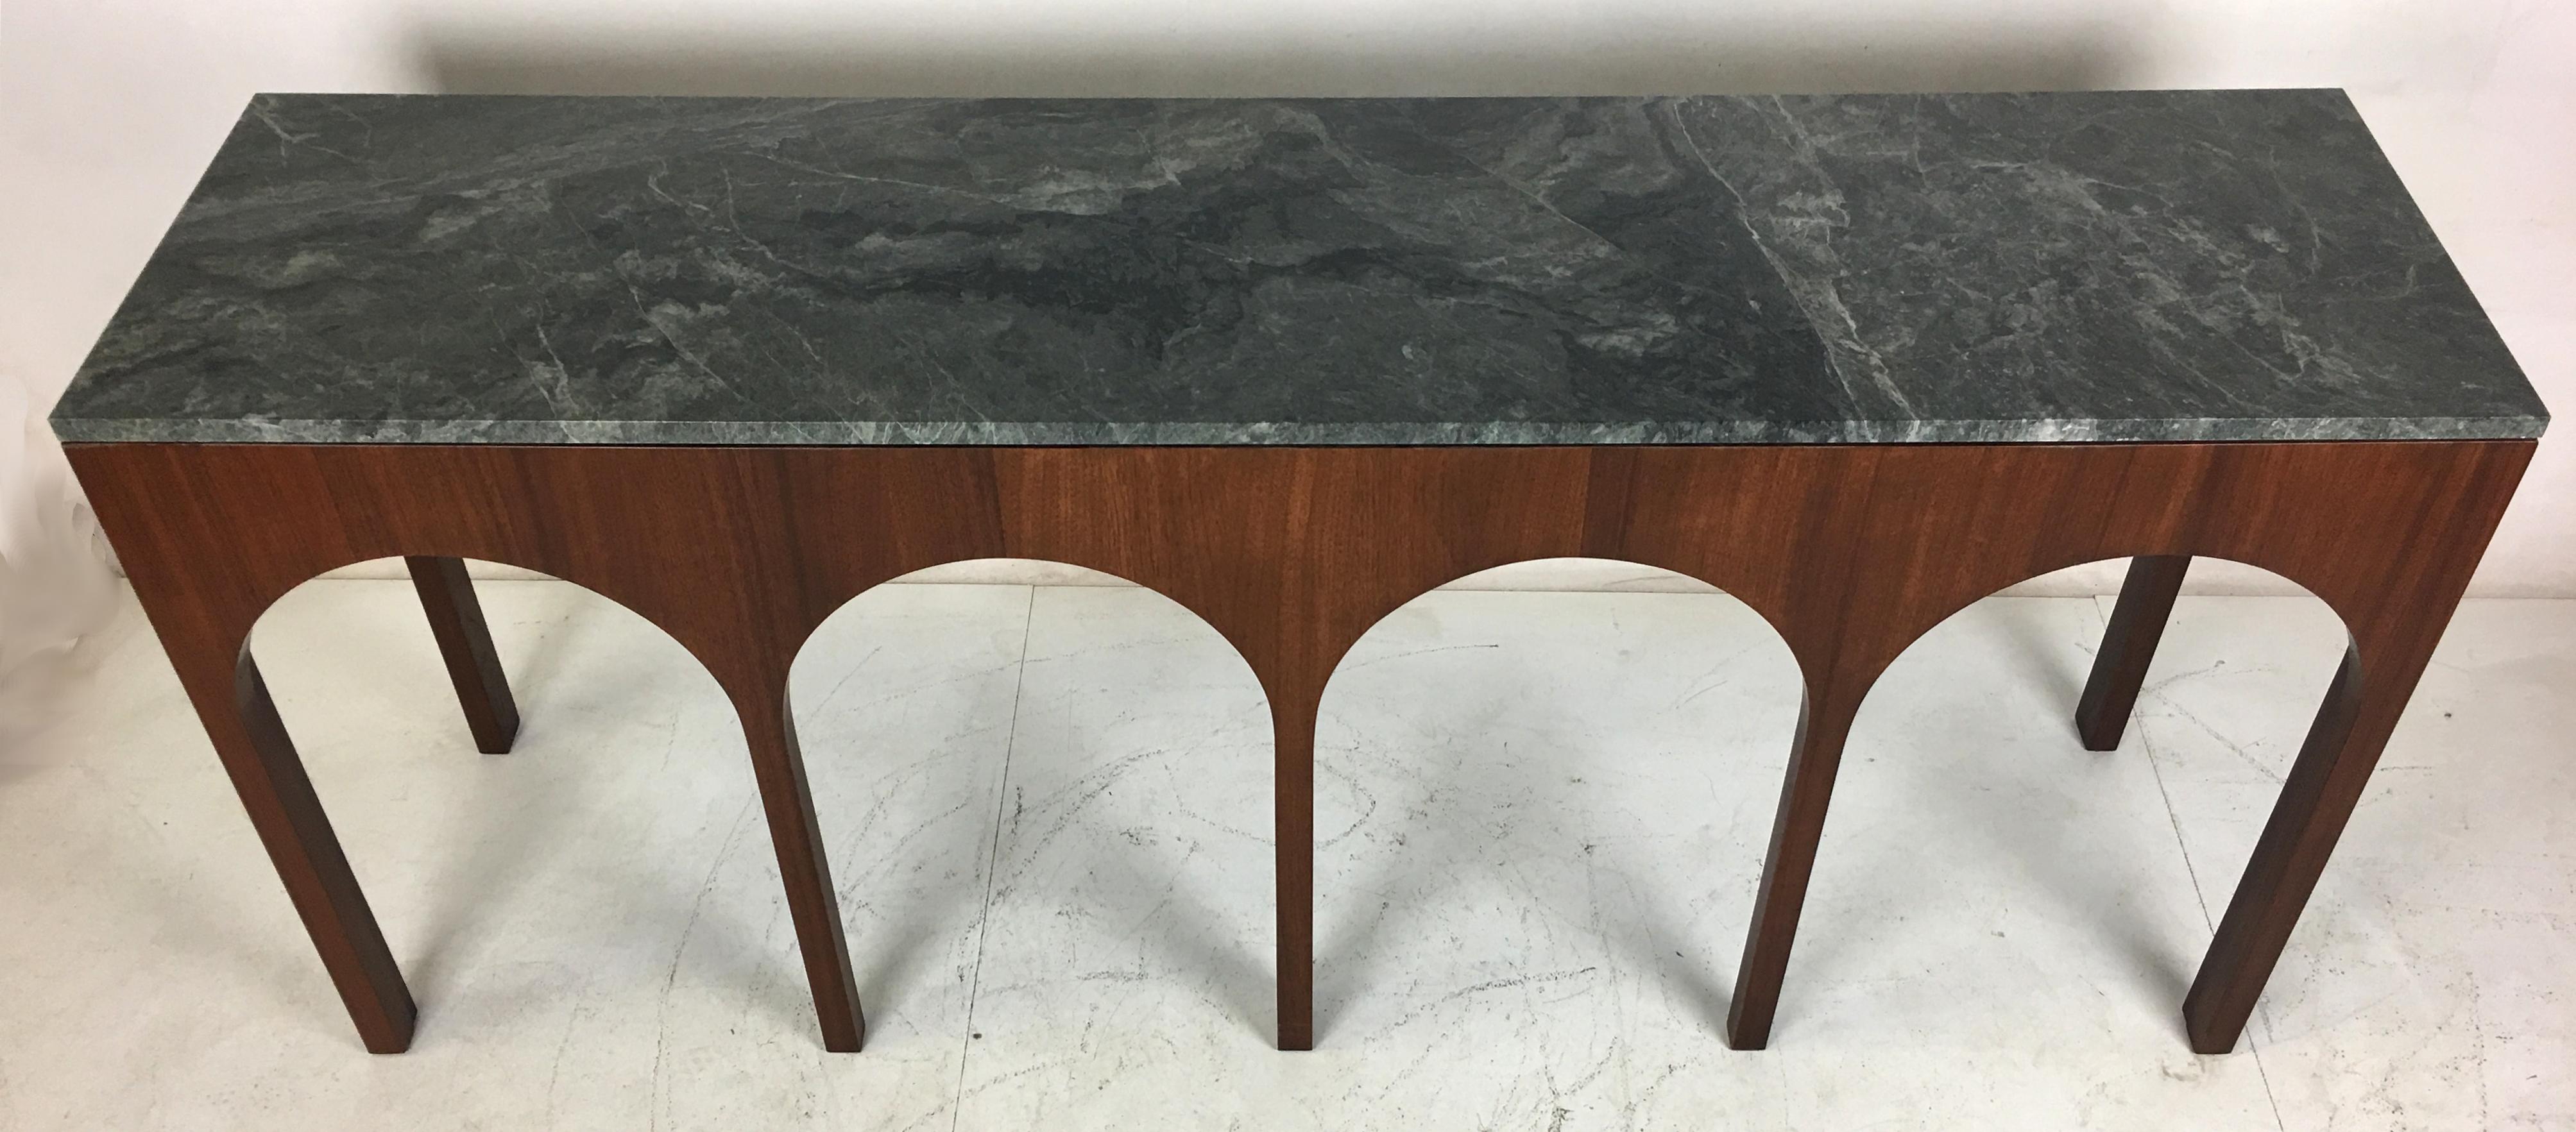 Neoclassical Revival Rare Coliseum Console with Marble Top by T.H. Robsjohn-Gibbings